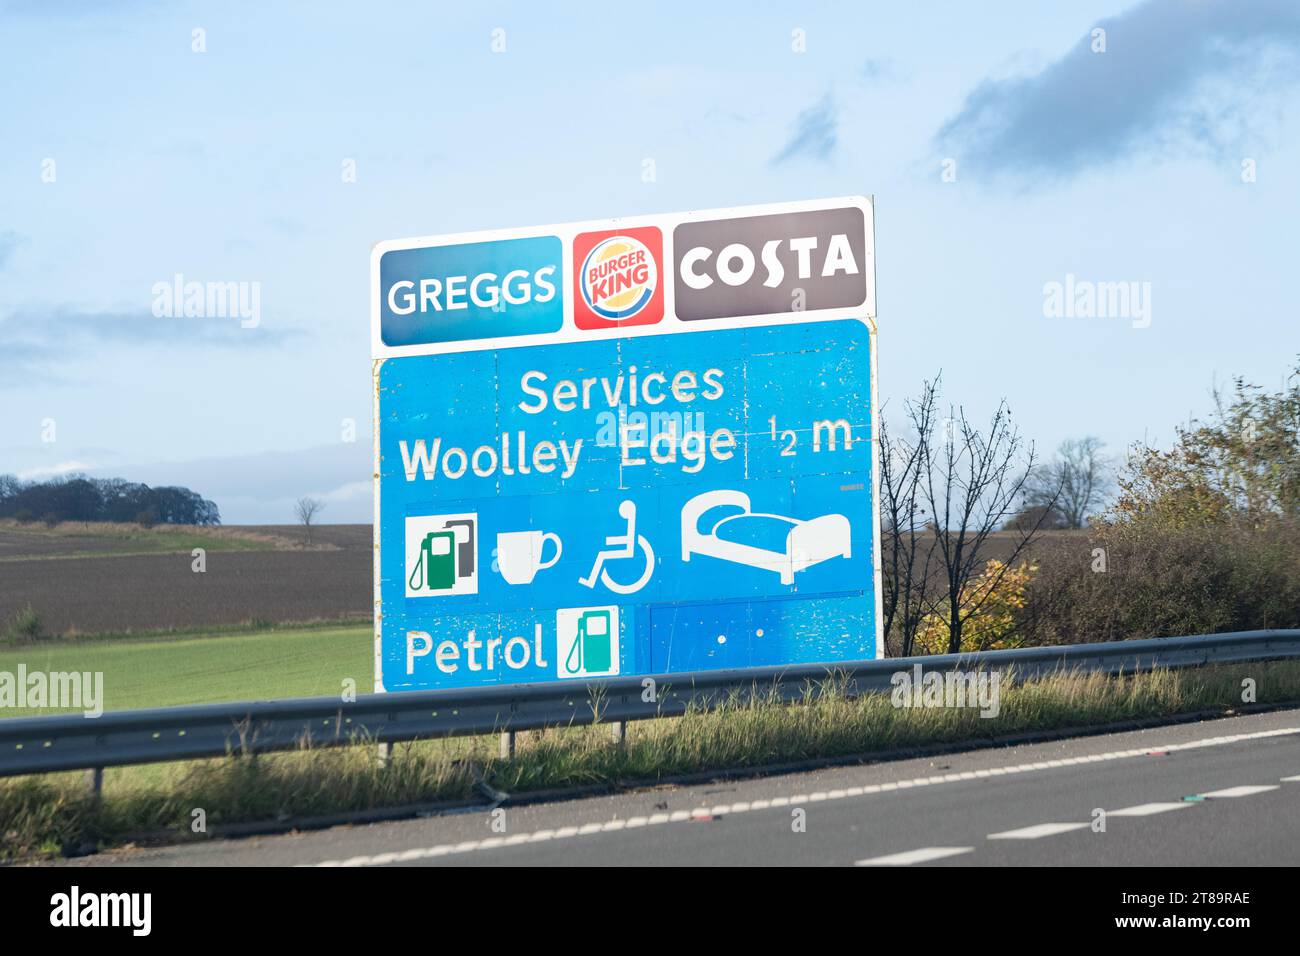 Woolley Edge Northbound Services sign, M1 motorway between Junctions 38 and 39, England, UK Stock Photo